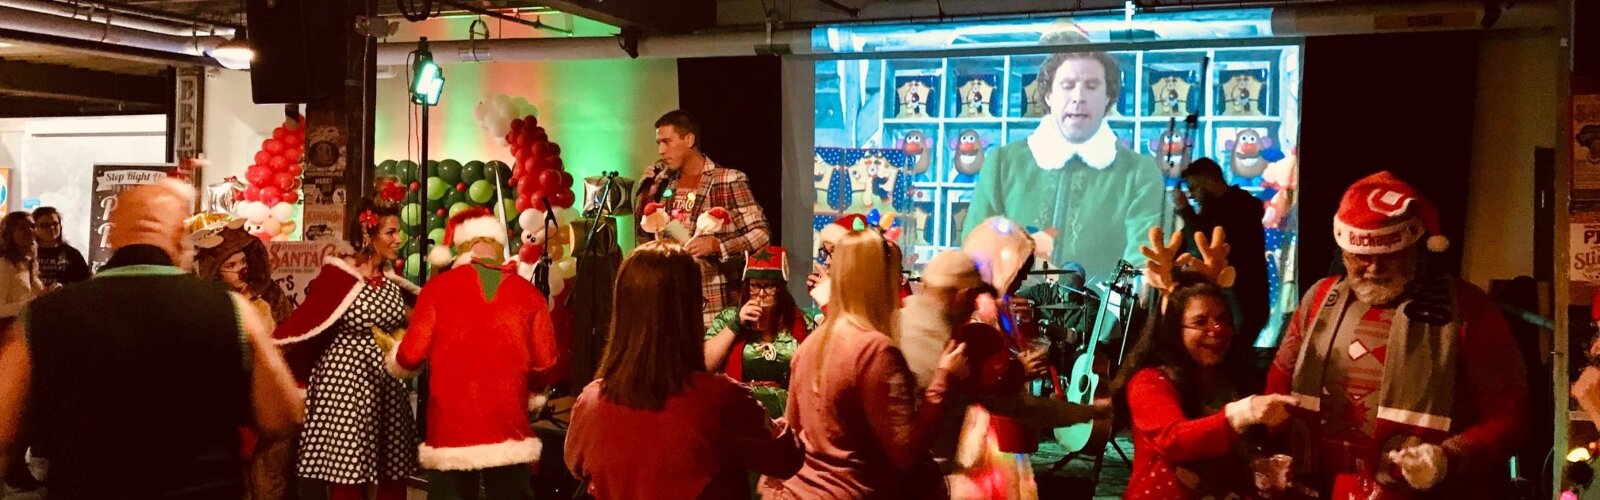 SantaCon launched in 2019 at Mother Stewart's Brewing Company.